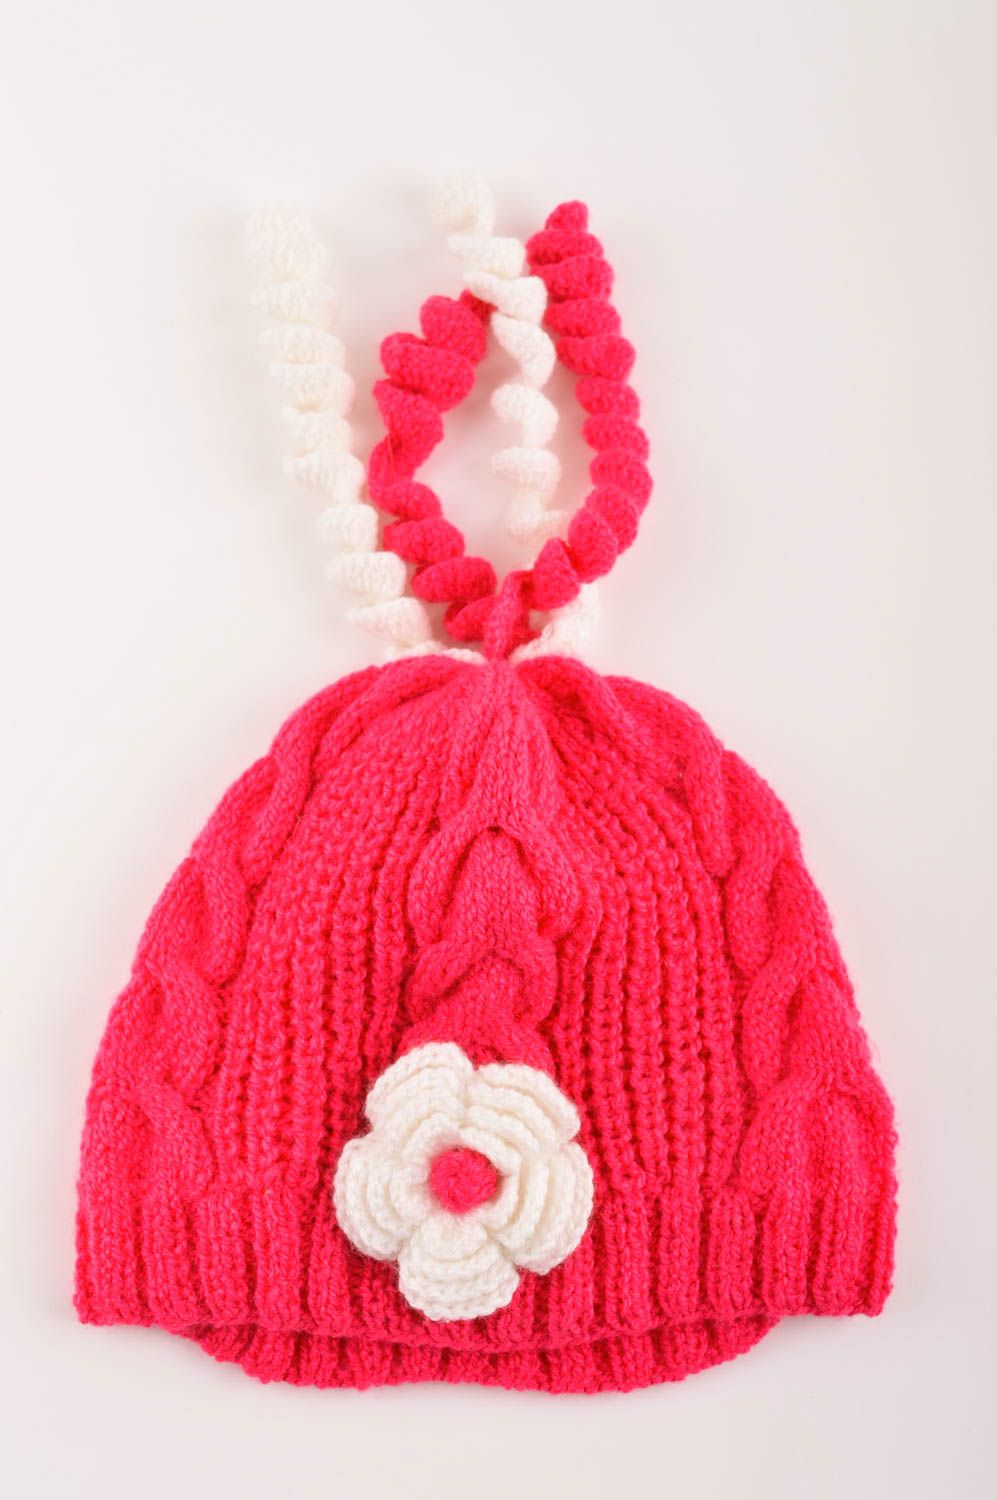 Handmade crocheted hat for babies red hat for girls stylish baby accessories photo 5